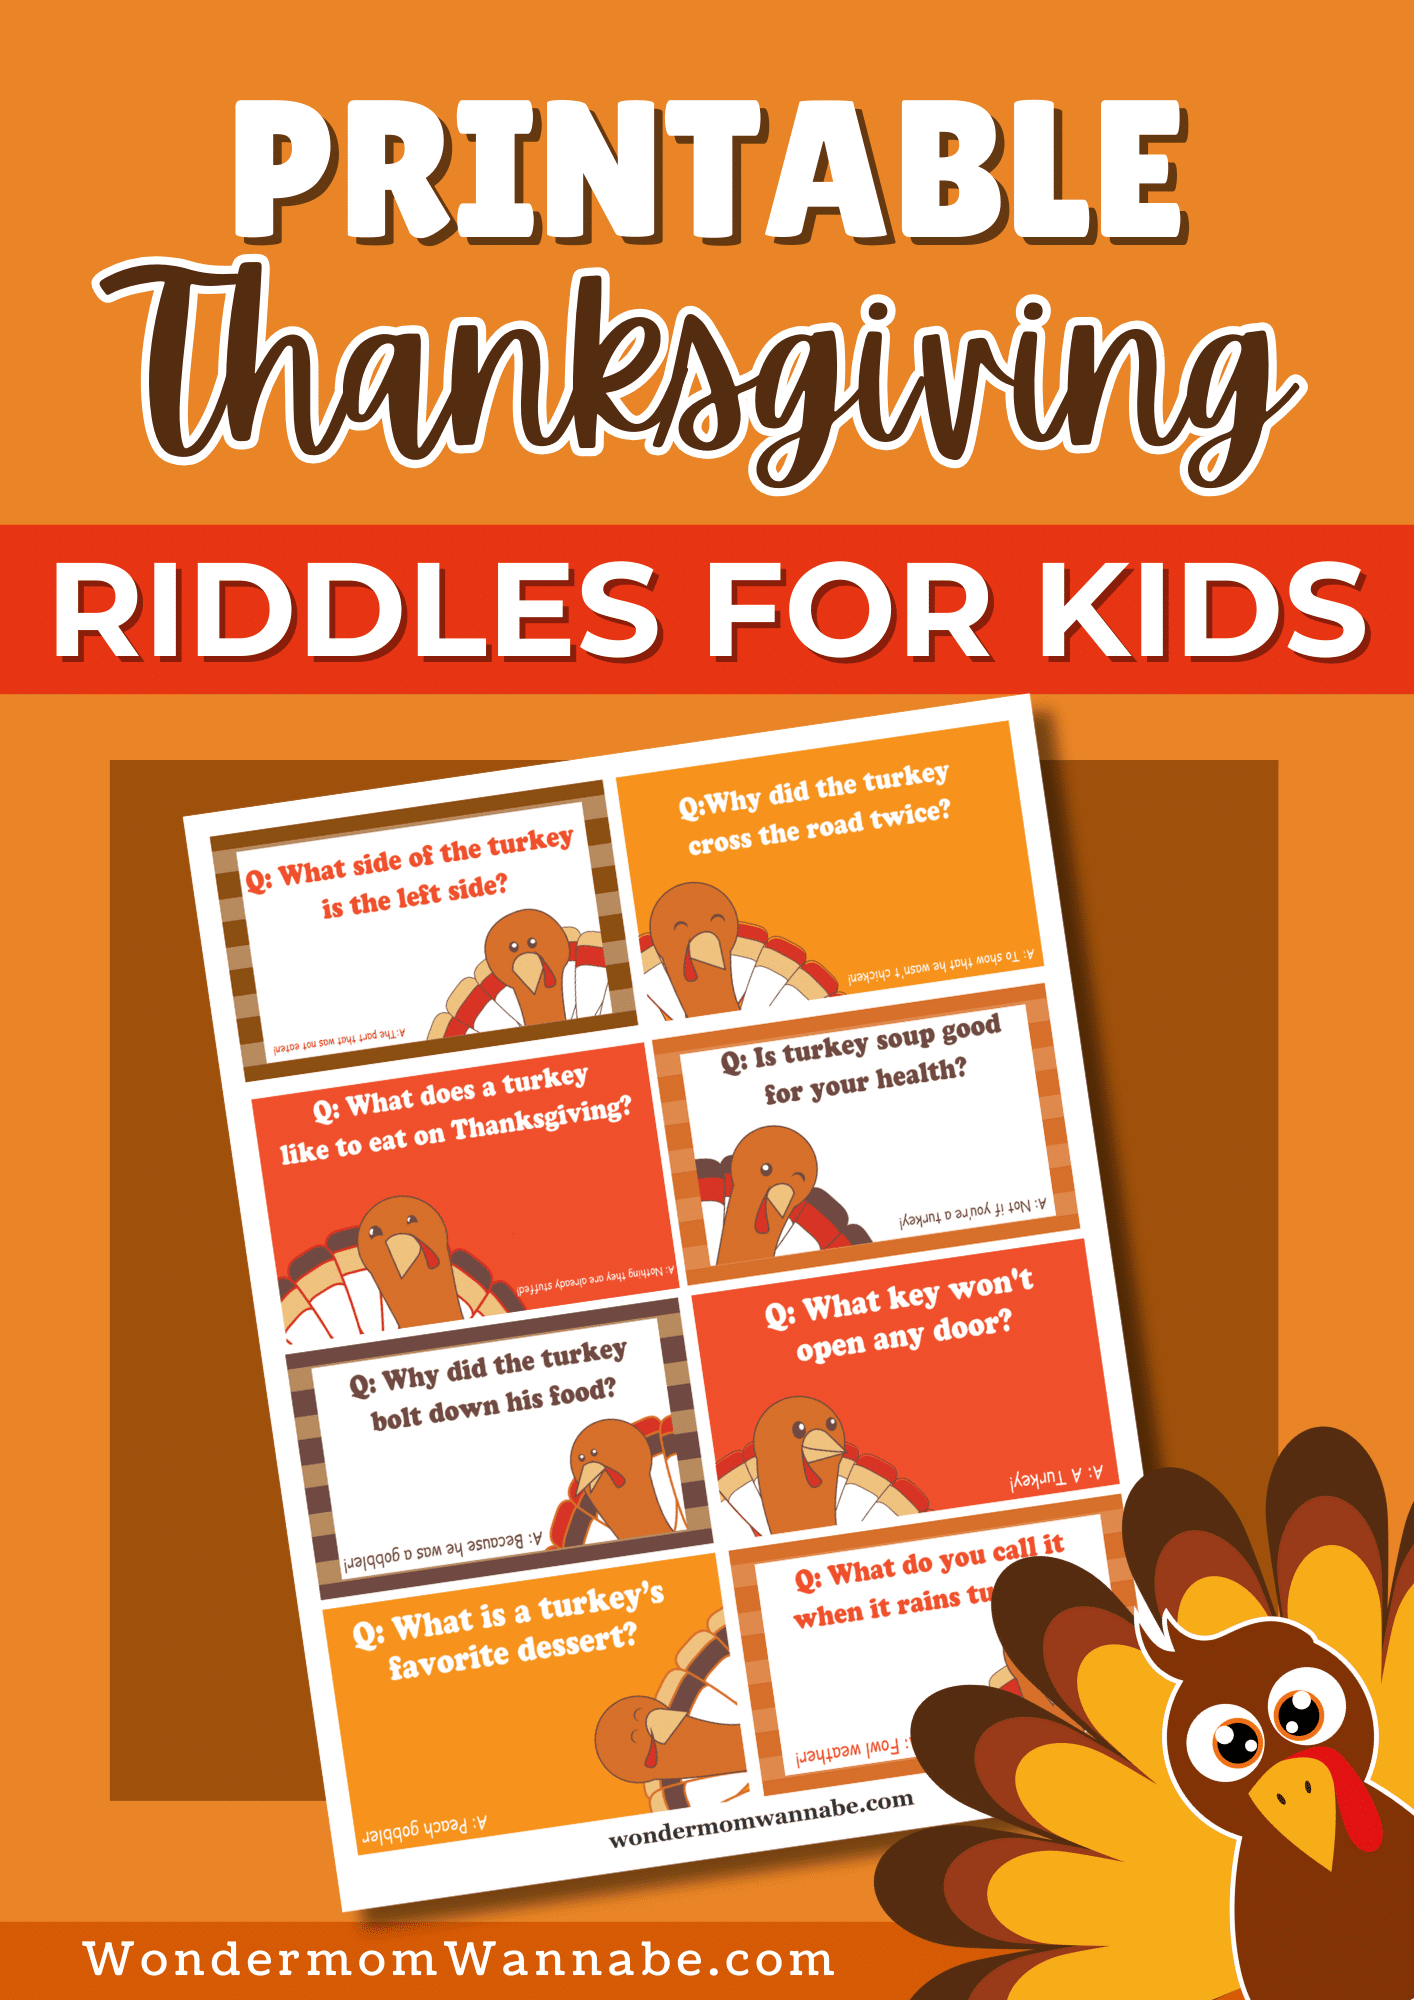 Fun and challenging printable Thanksgiving riddles for kids.